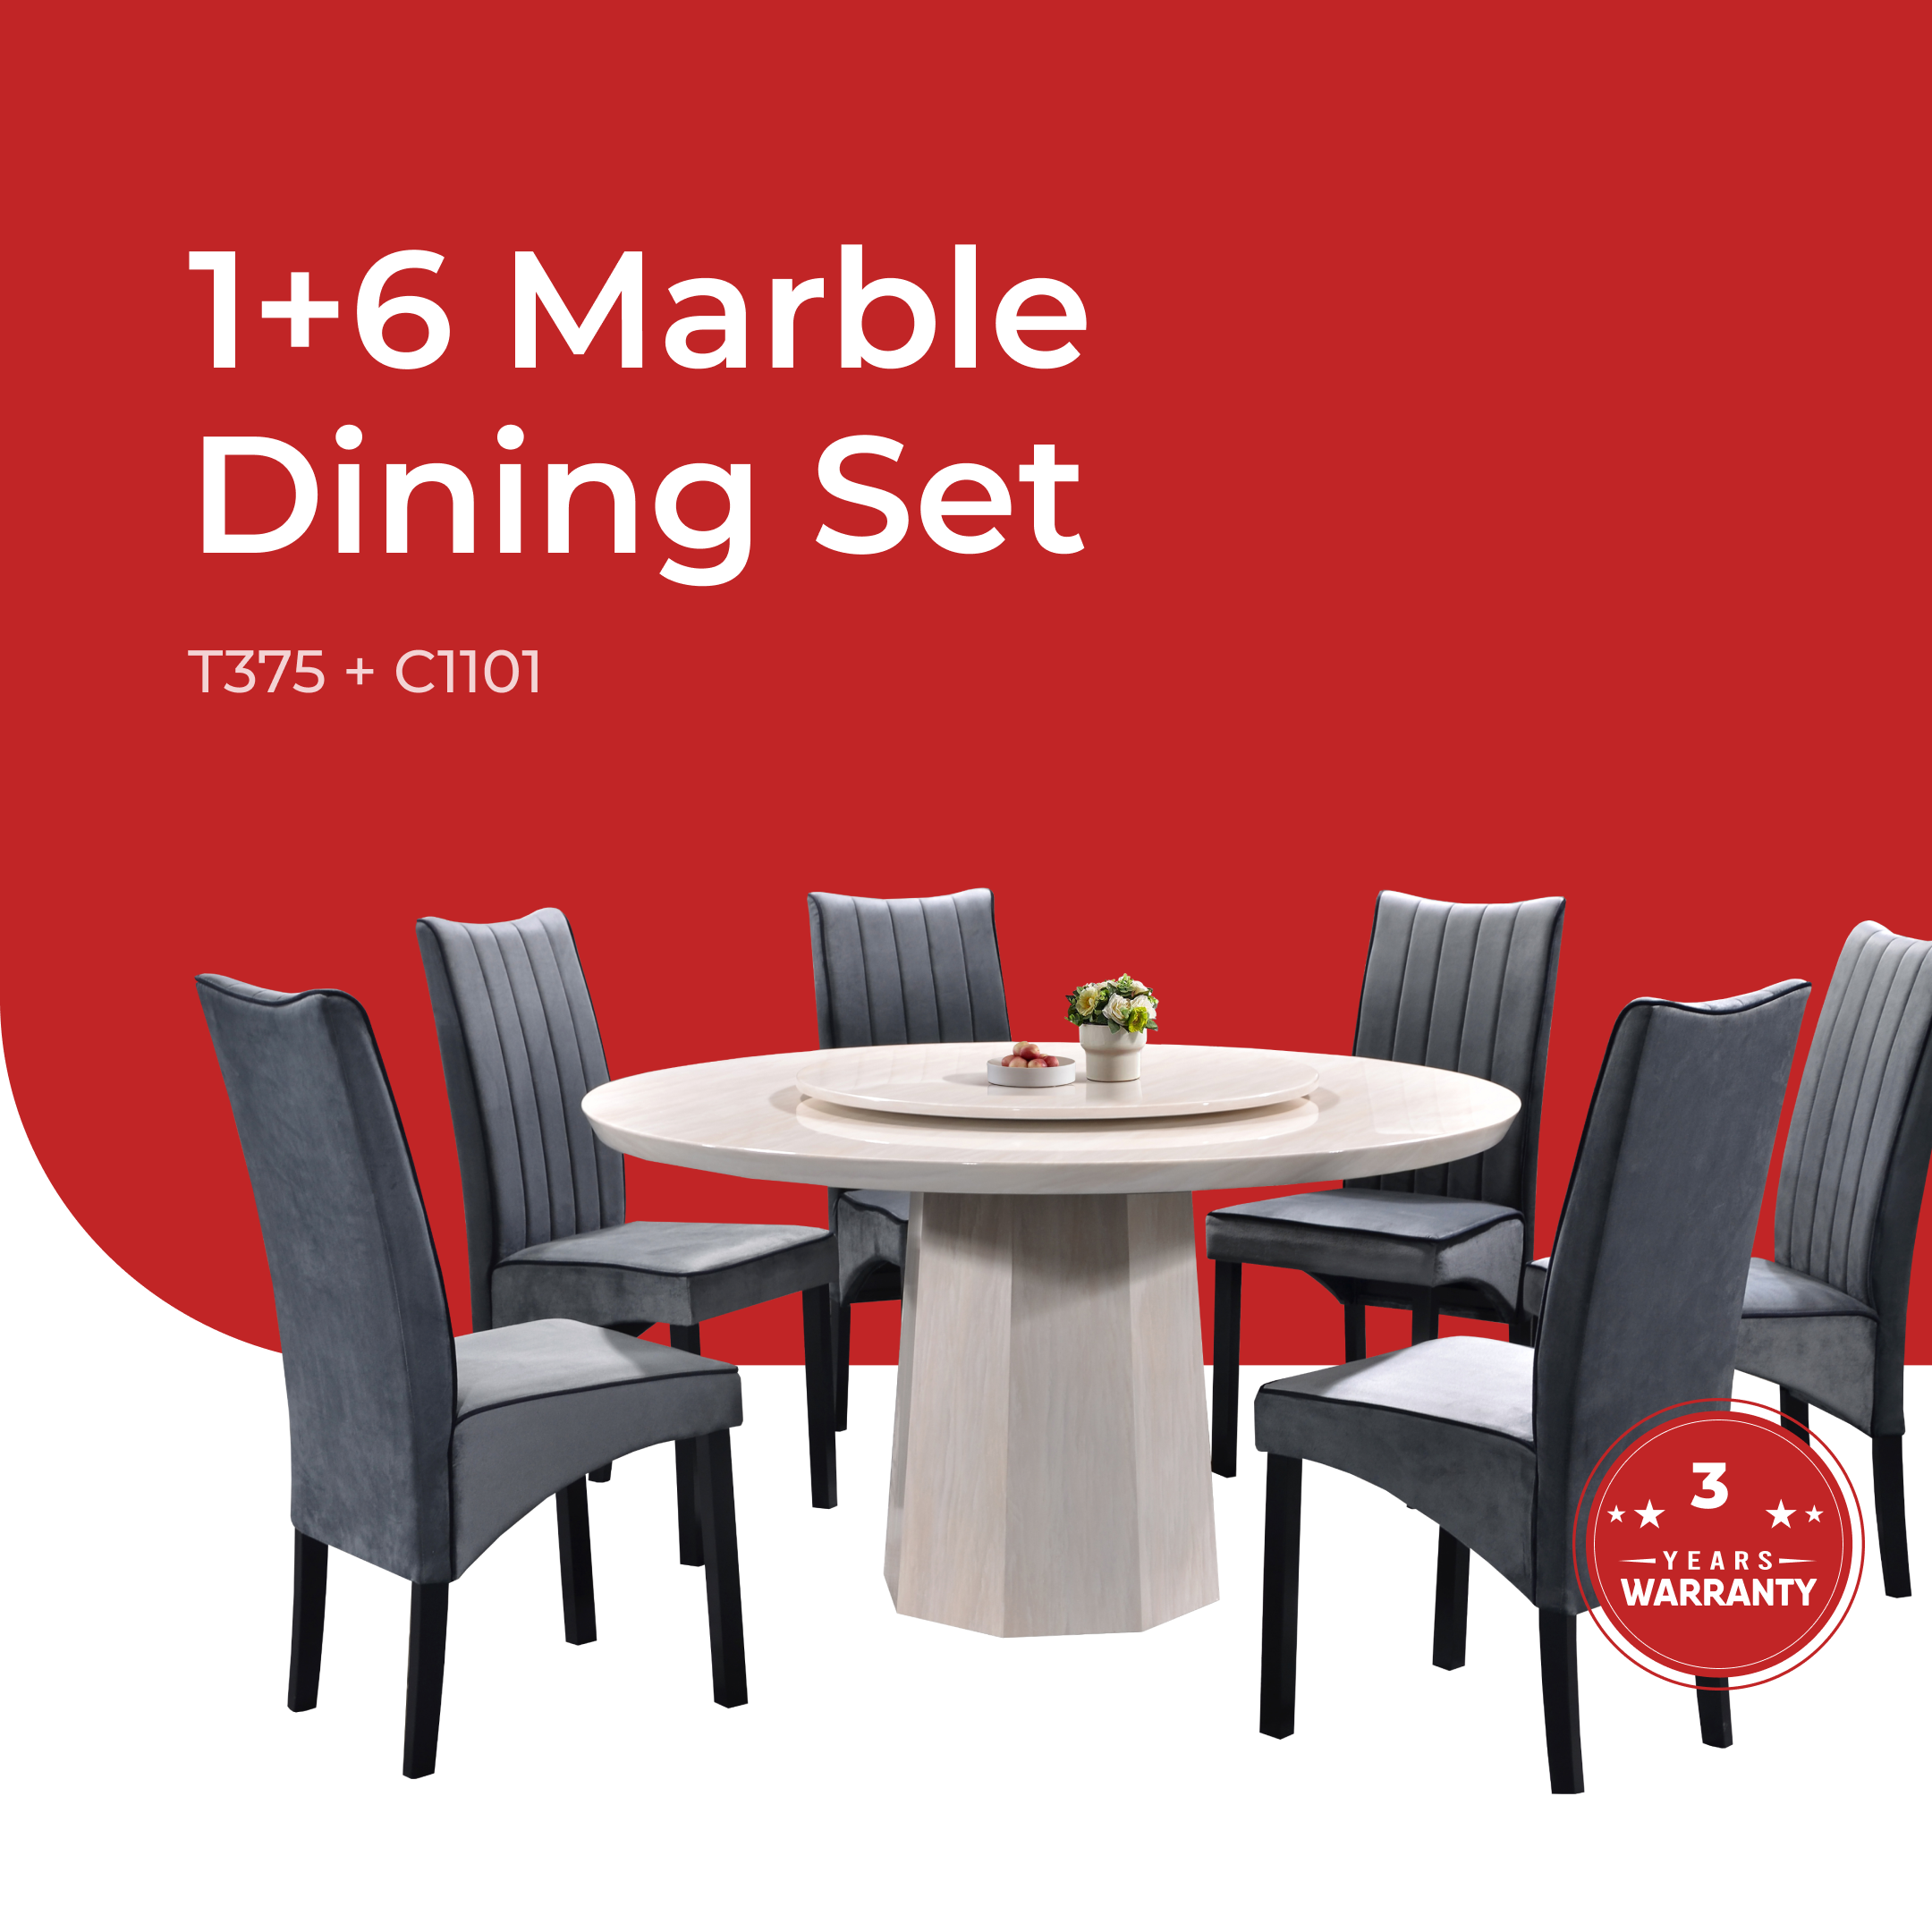 Marble Dining Set -T375+C1101